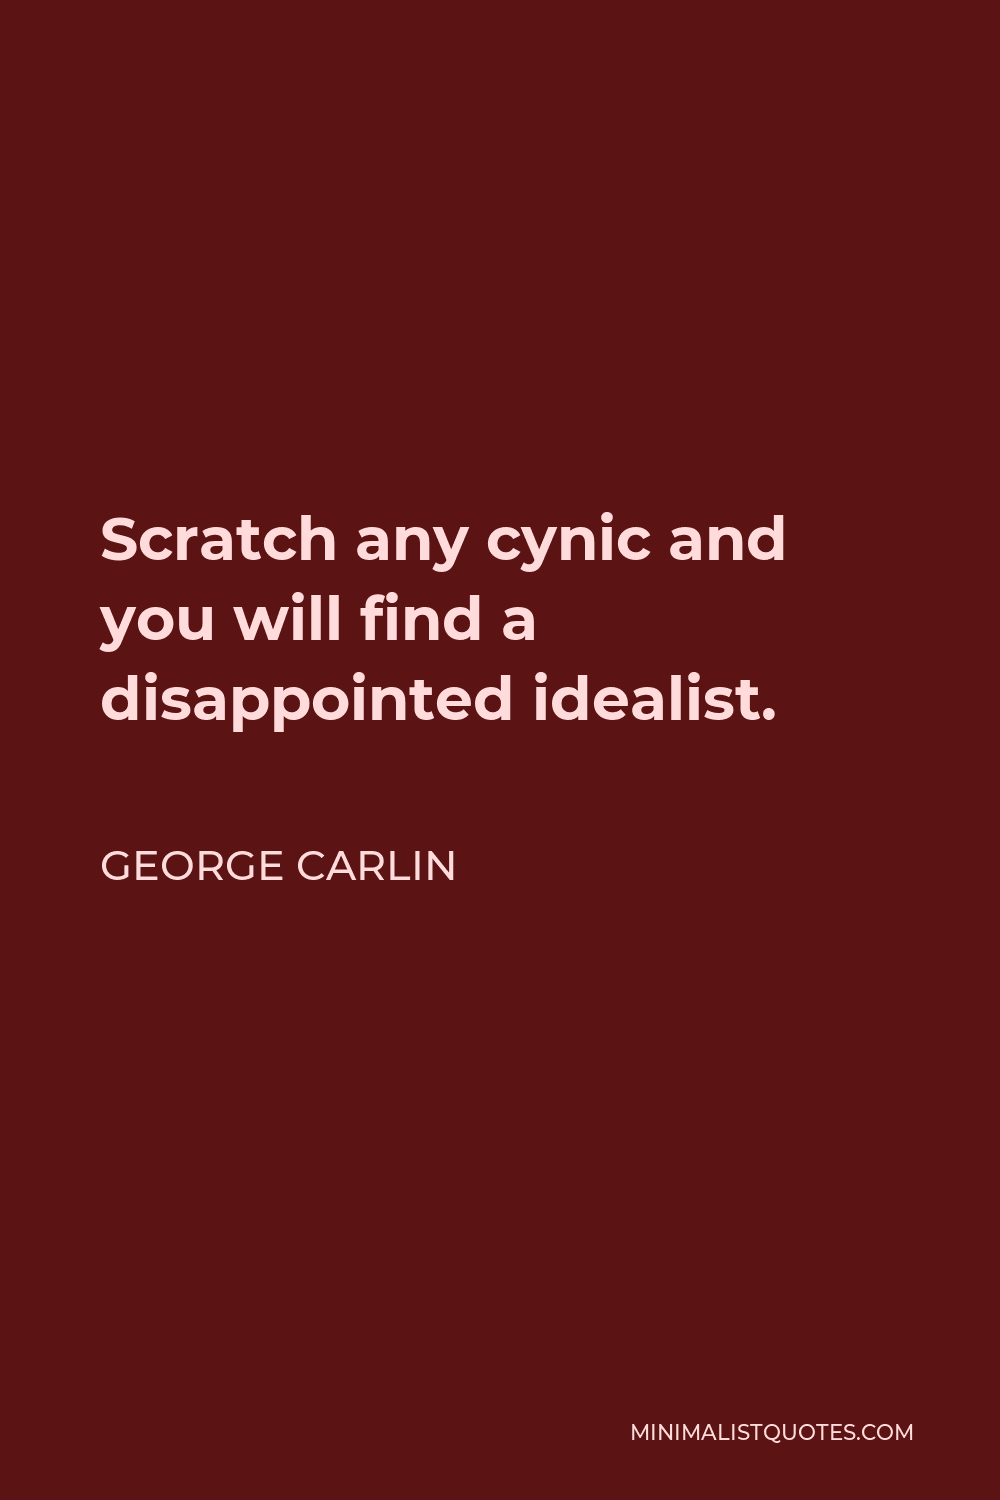 George Carlin Quote - Scratch any cynic and you will find a disappointed idealist.